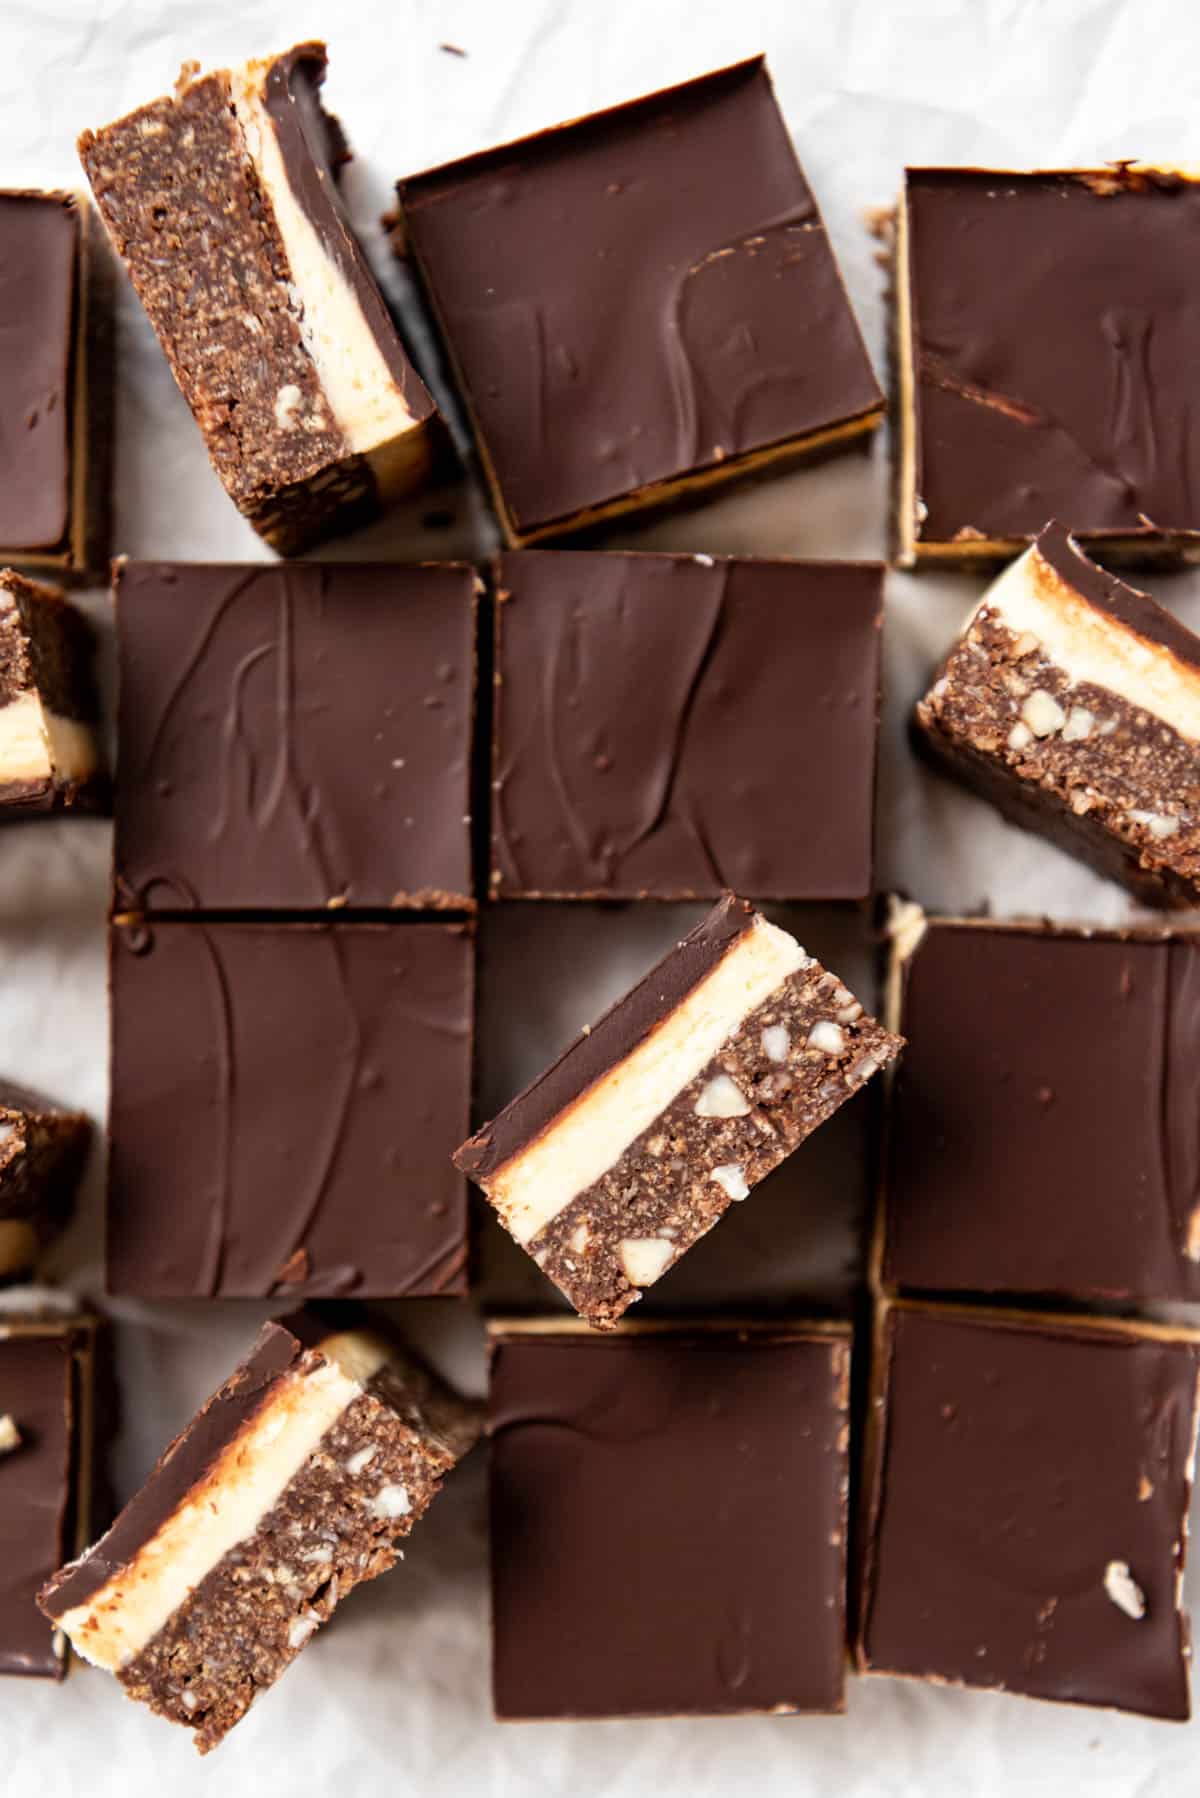 An overhead image of nanaimo bars that have been cut into squares with some standing on the sides to show the layers inside.